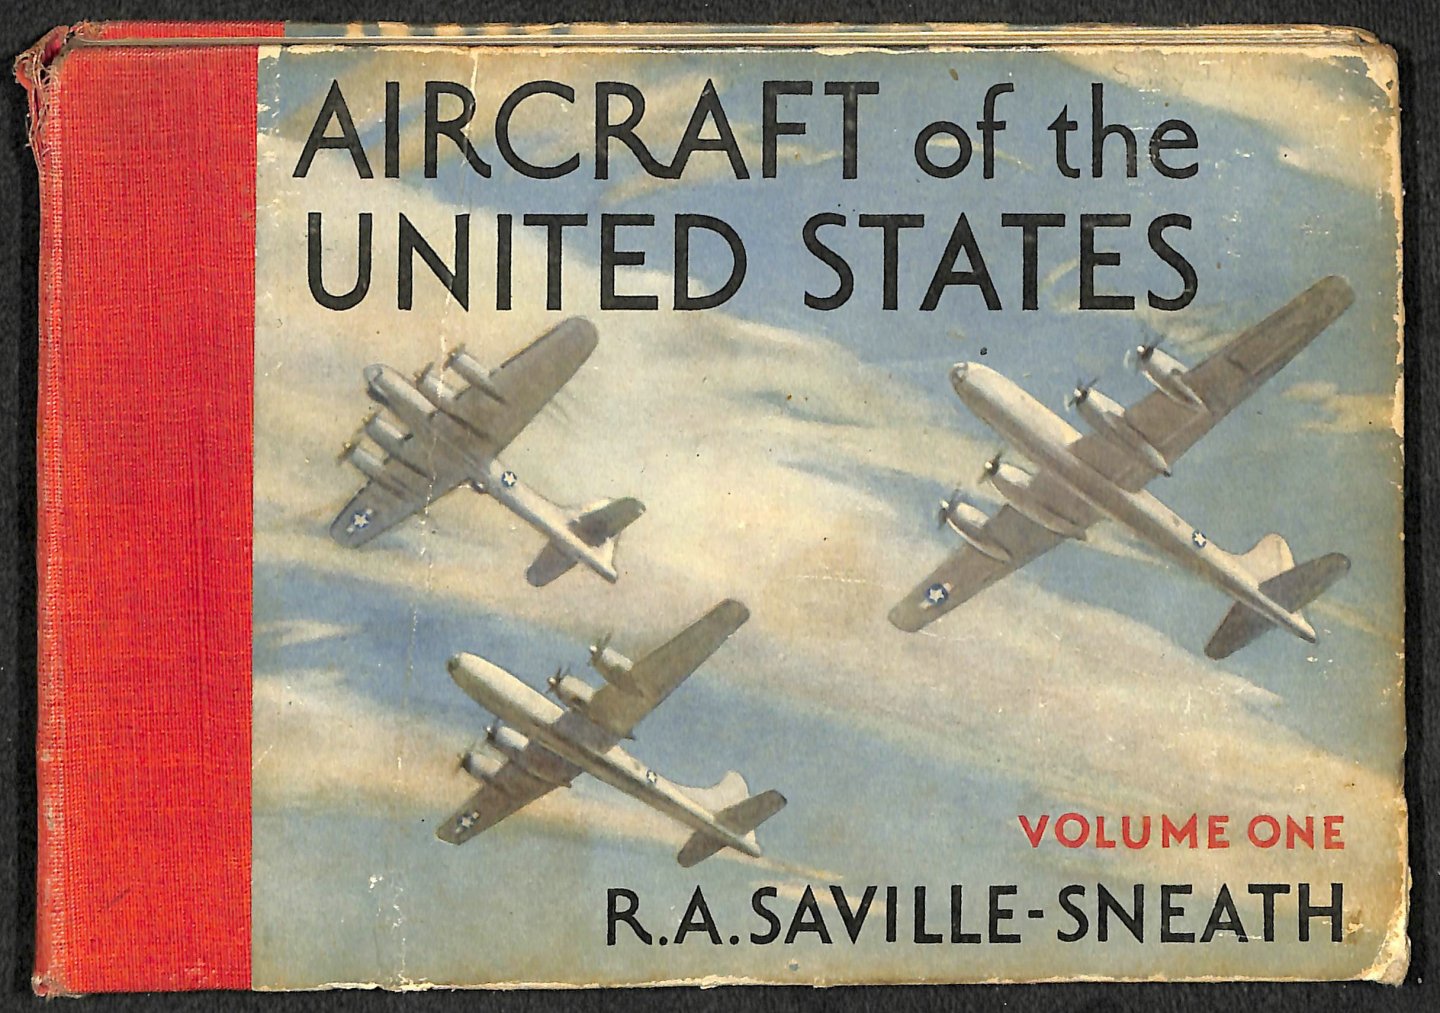 Saville-Sneath, R.A. - Aircraft of the United States Volume one.